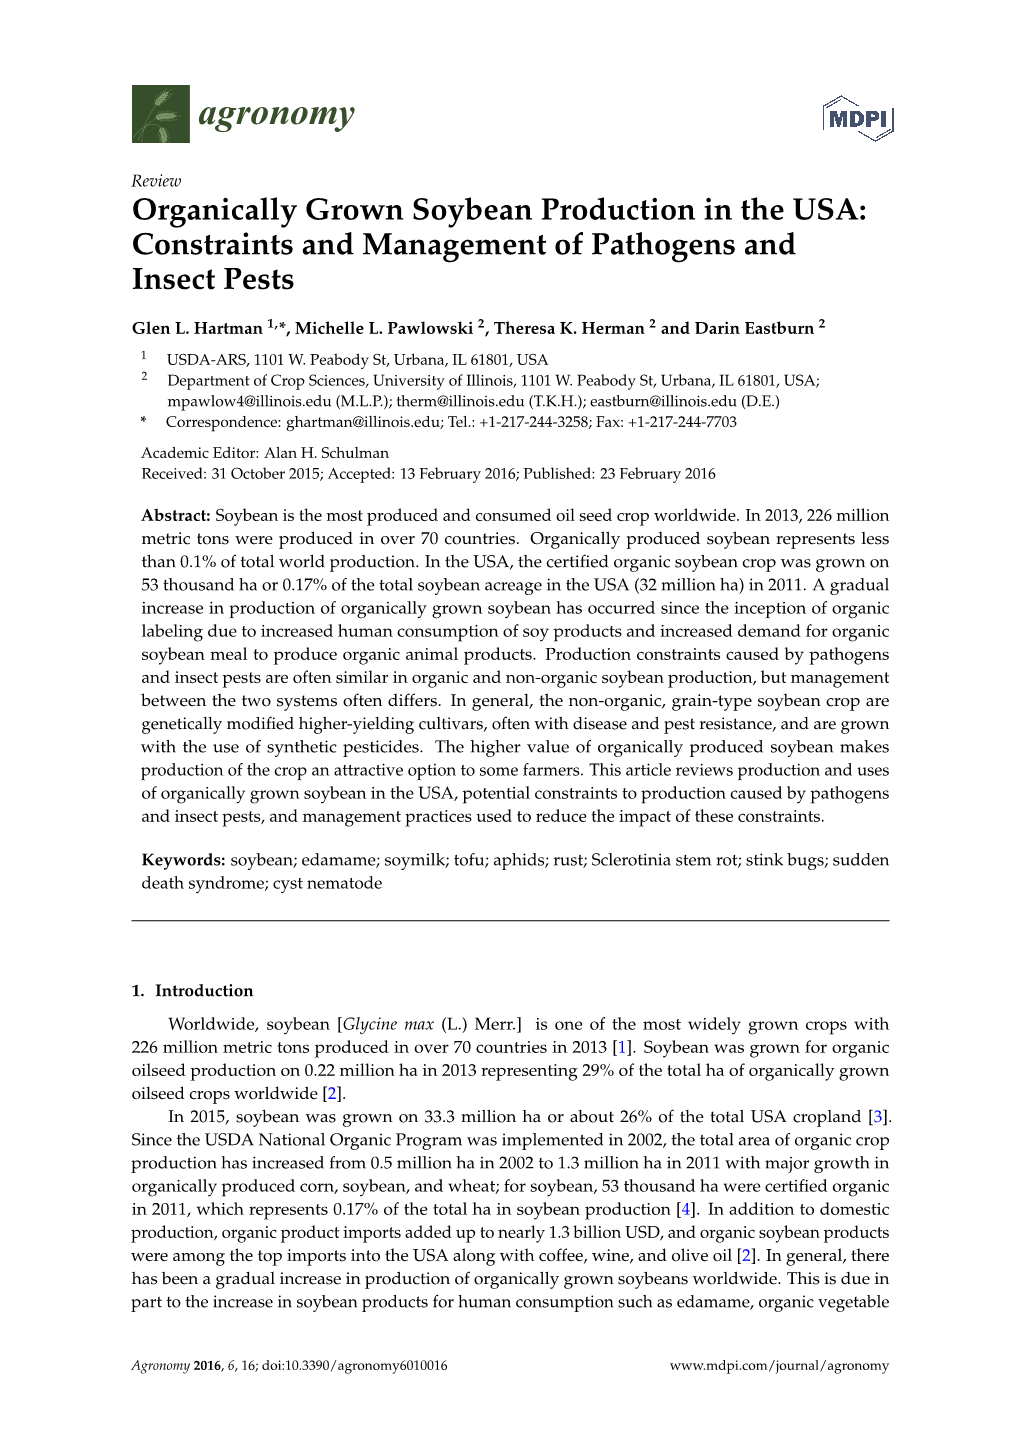 Organically Grown Soybean Production in the USA: Constraints and Management of Pathogens and Insect Pests